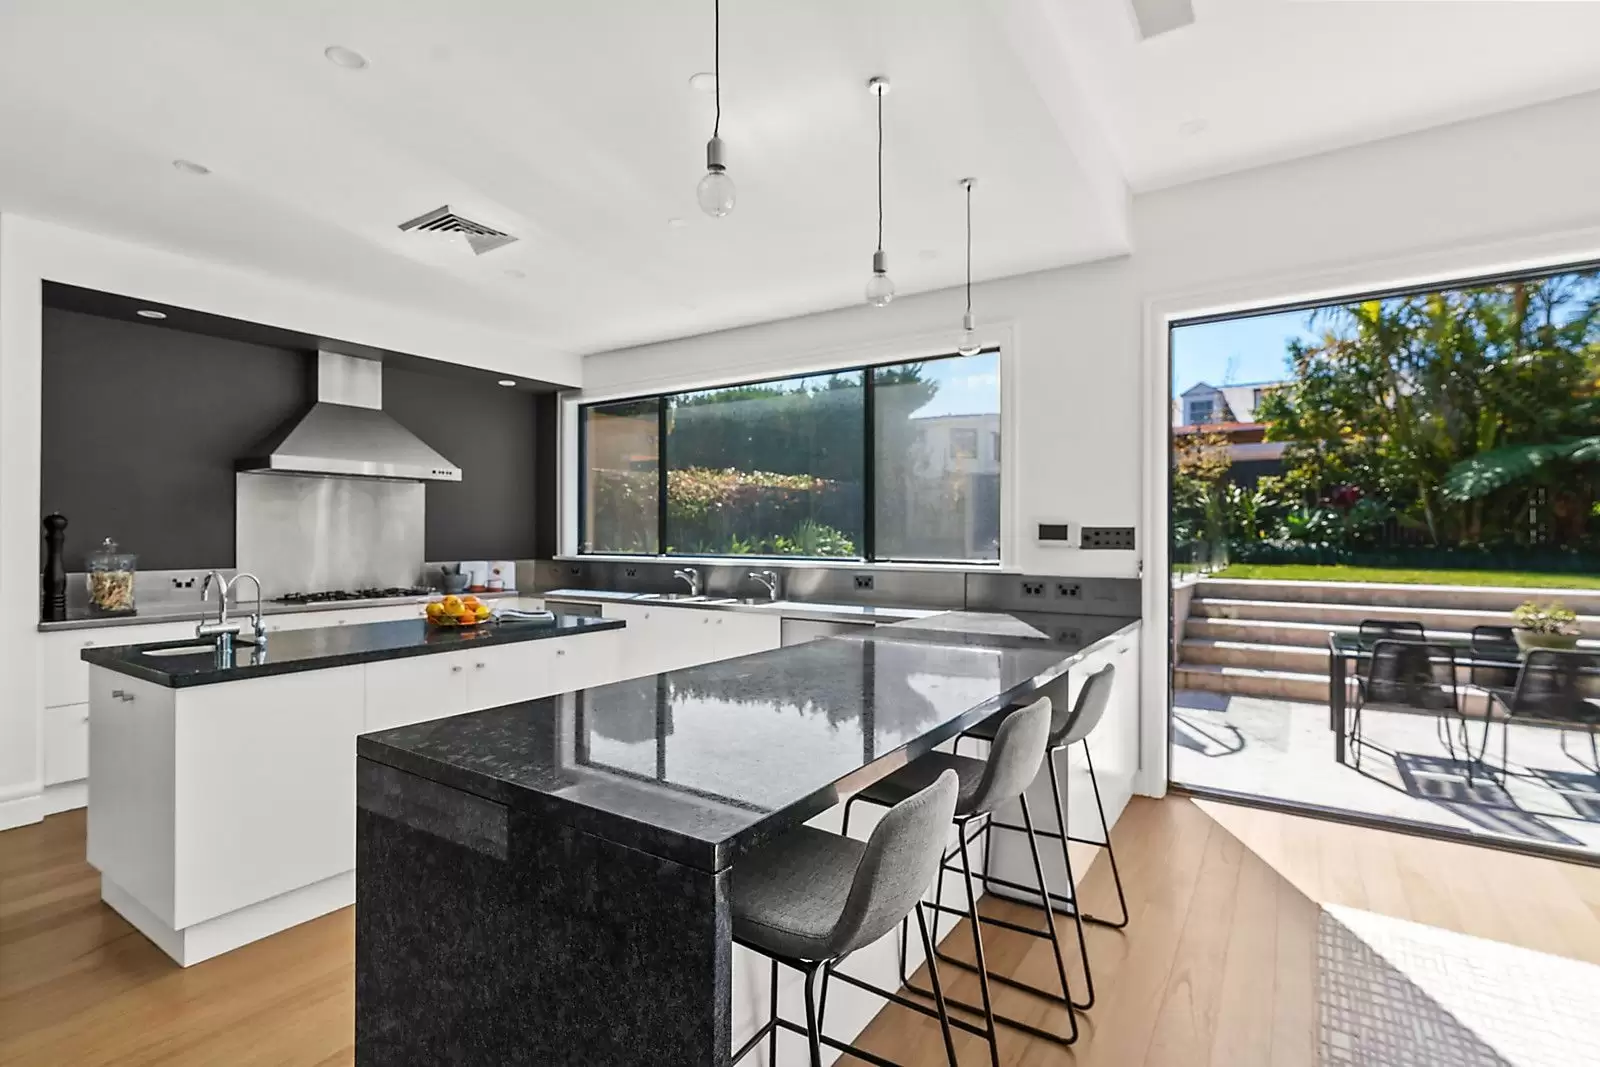 Photo #7: 7 Dalley Avenue, Vaucluse - Sold by Sydney Sotheby's International Realty